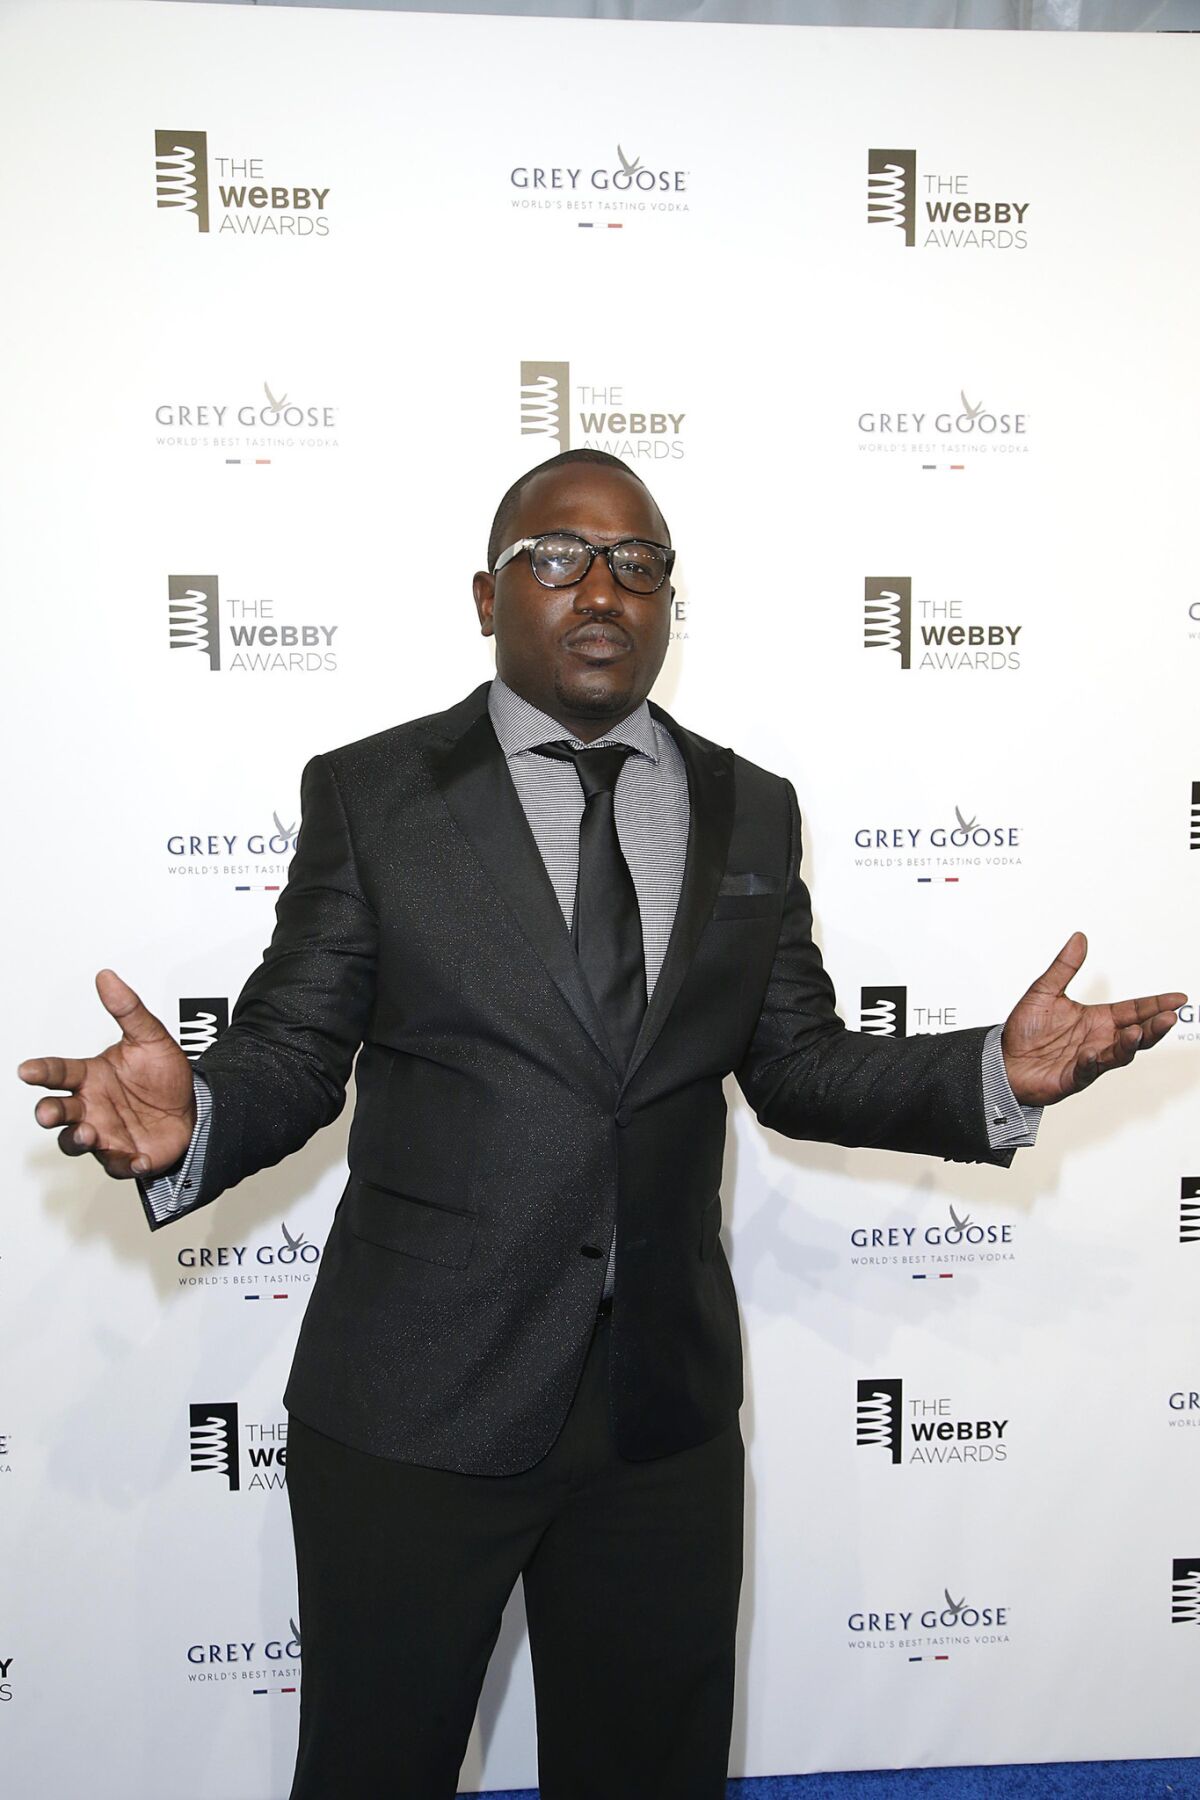 Hannibal Buress attends the 19th Annual Webby Awards in New York on May 18, 2015. One of his routines criticizes Bill Cosby renewed sexual allegations against the older comedian.